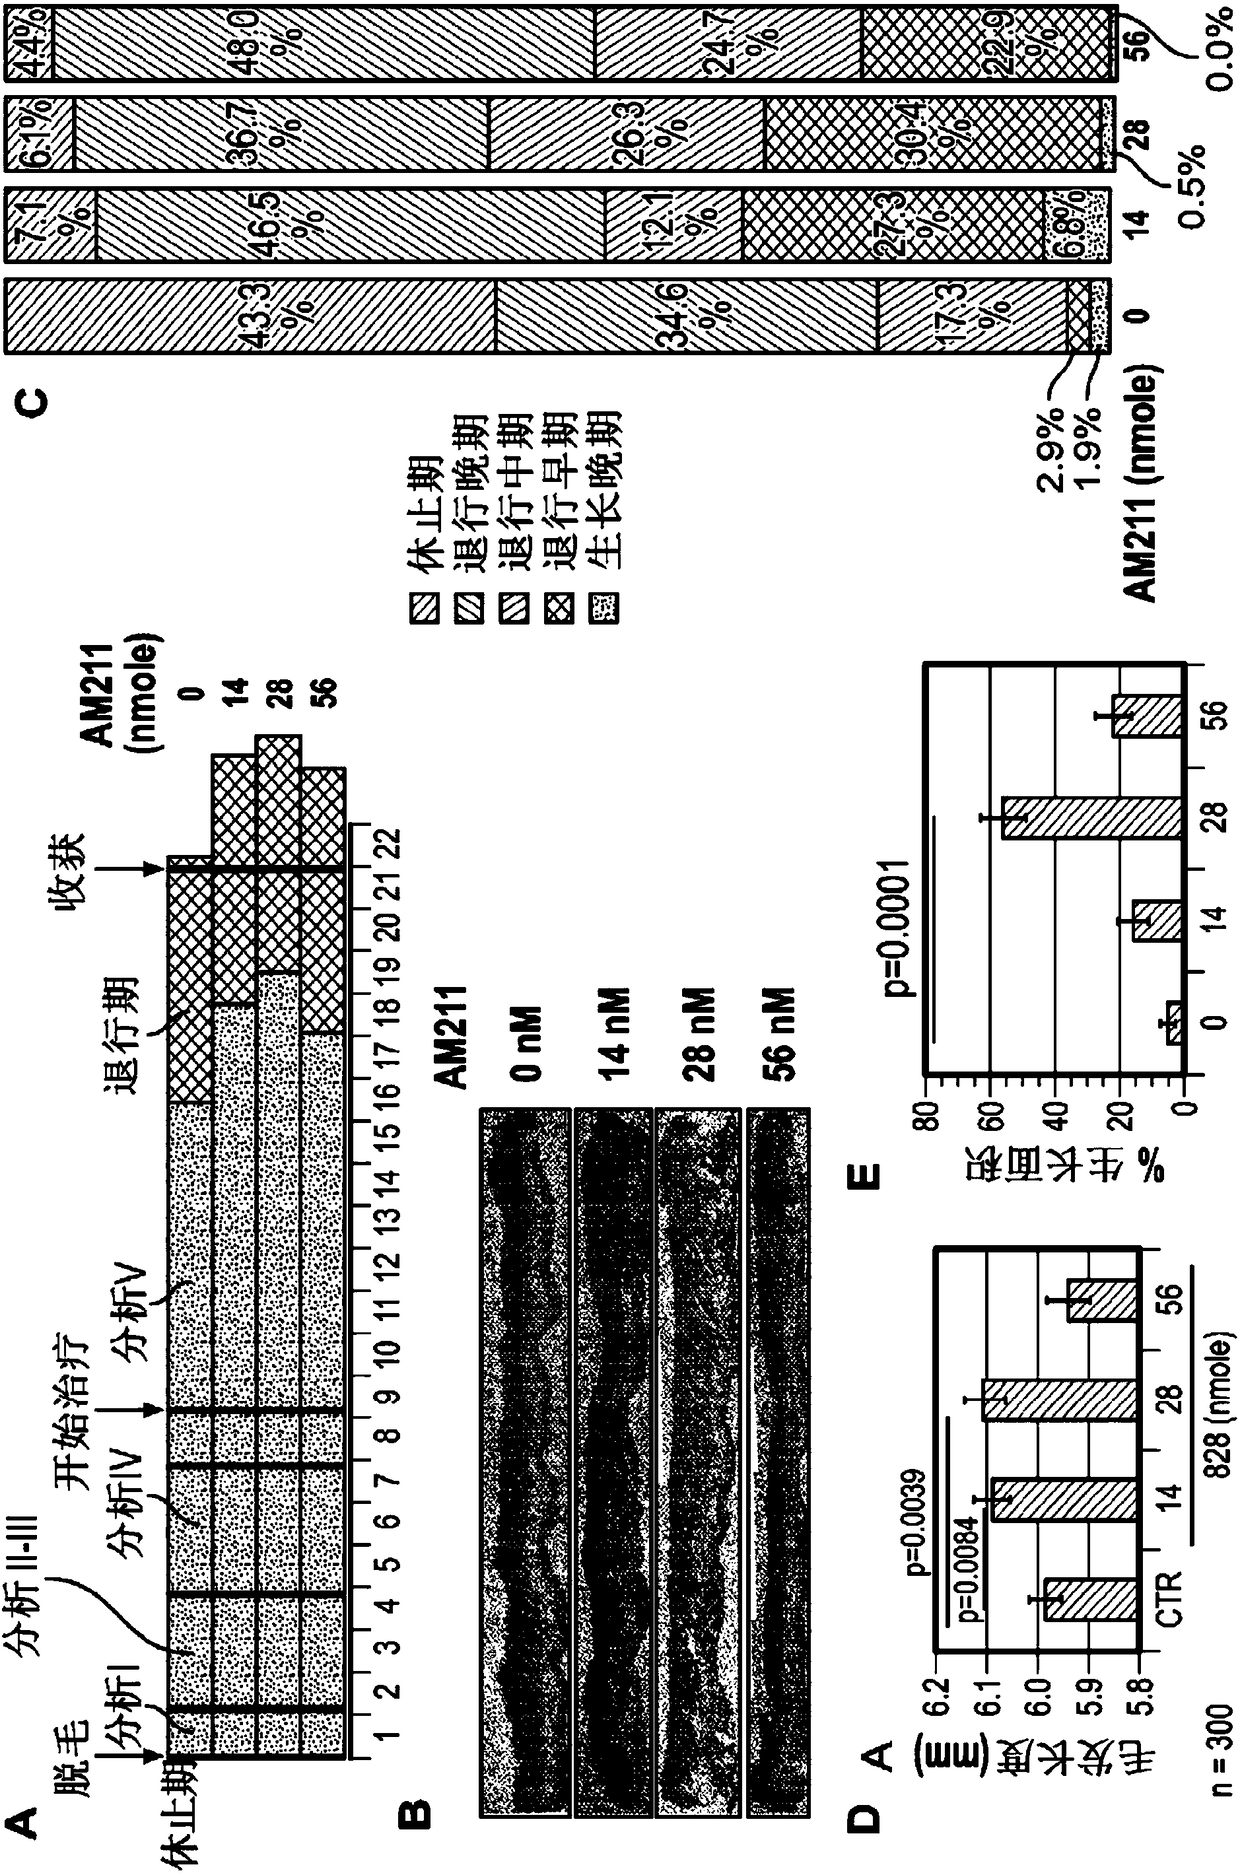 Single nucleotide polymorphic alleles of human dp-2 gene for detection of susceptibility to hair growth inhibition by pgd2